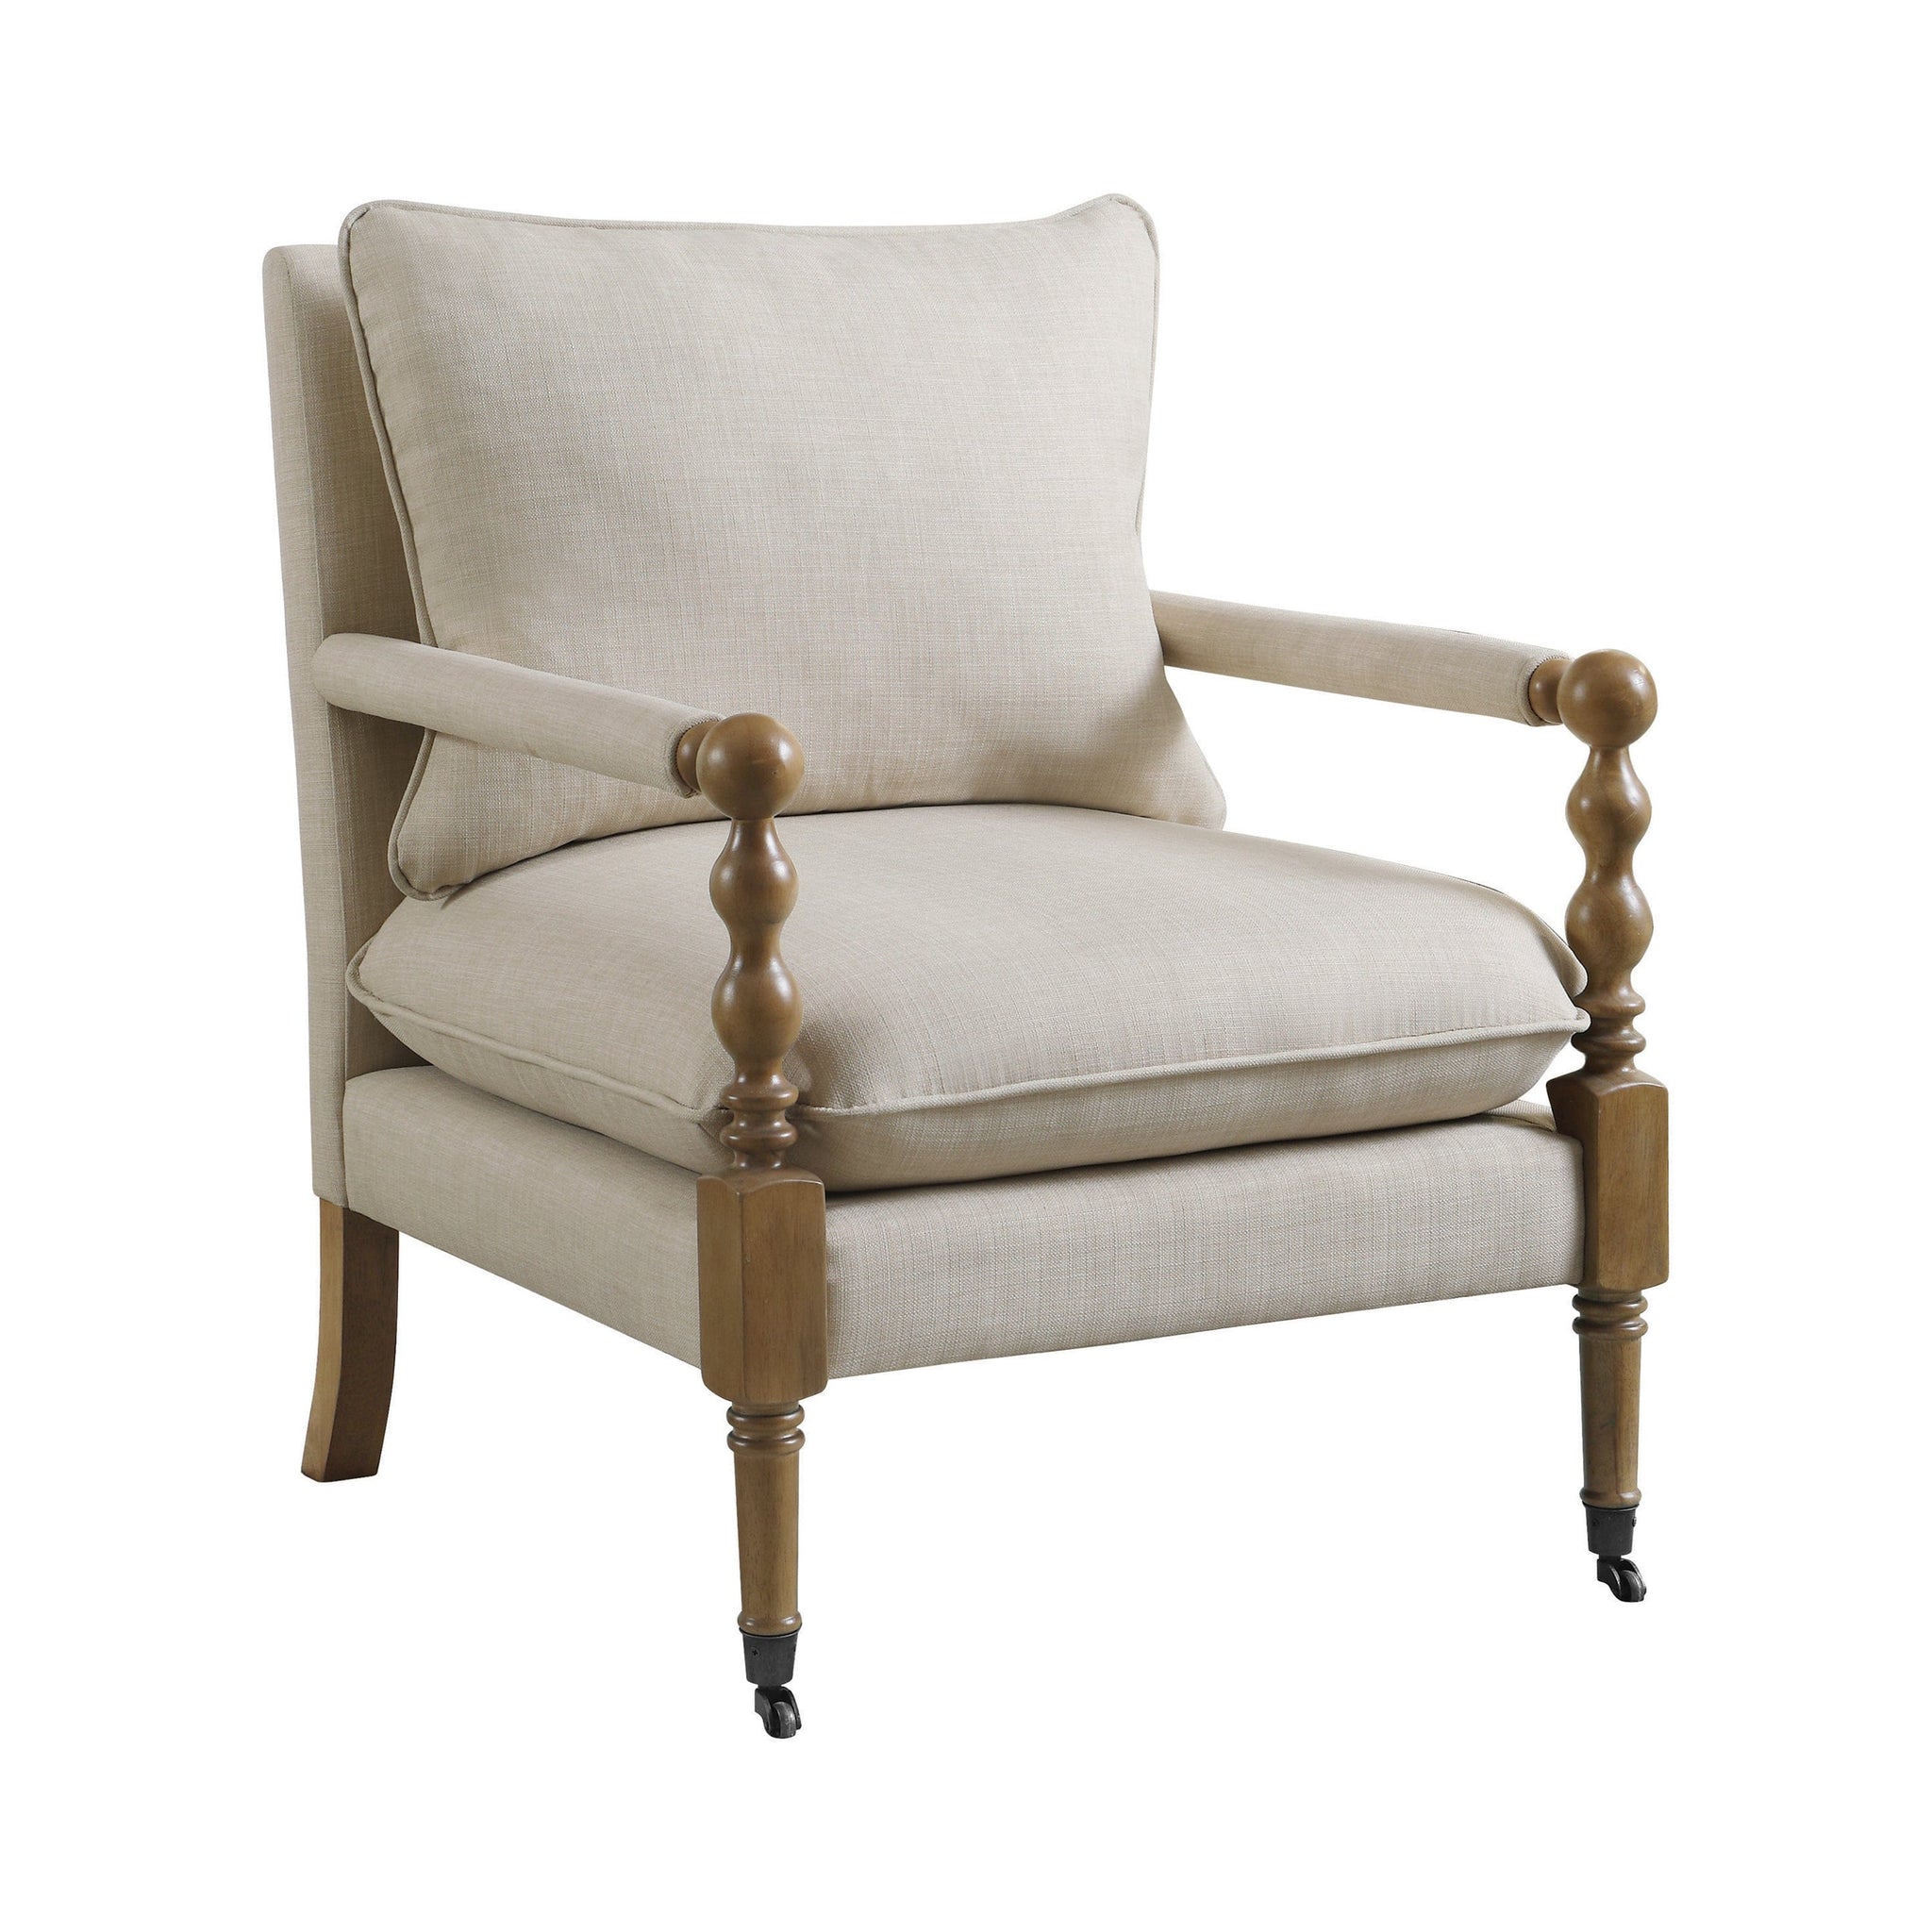 Upholstered Accent Chair With Casters Beige - 903058